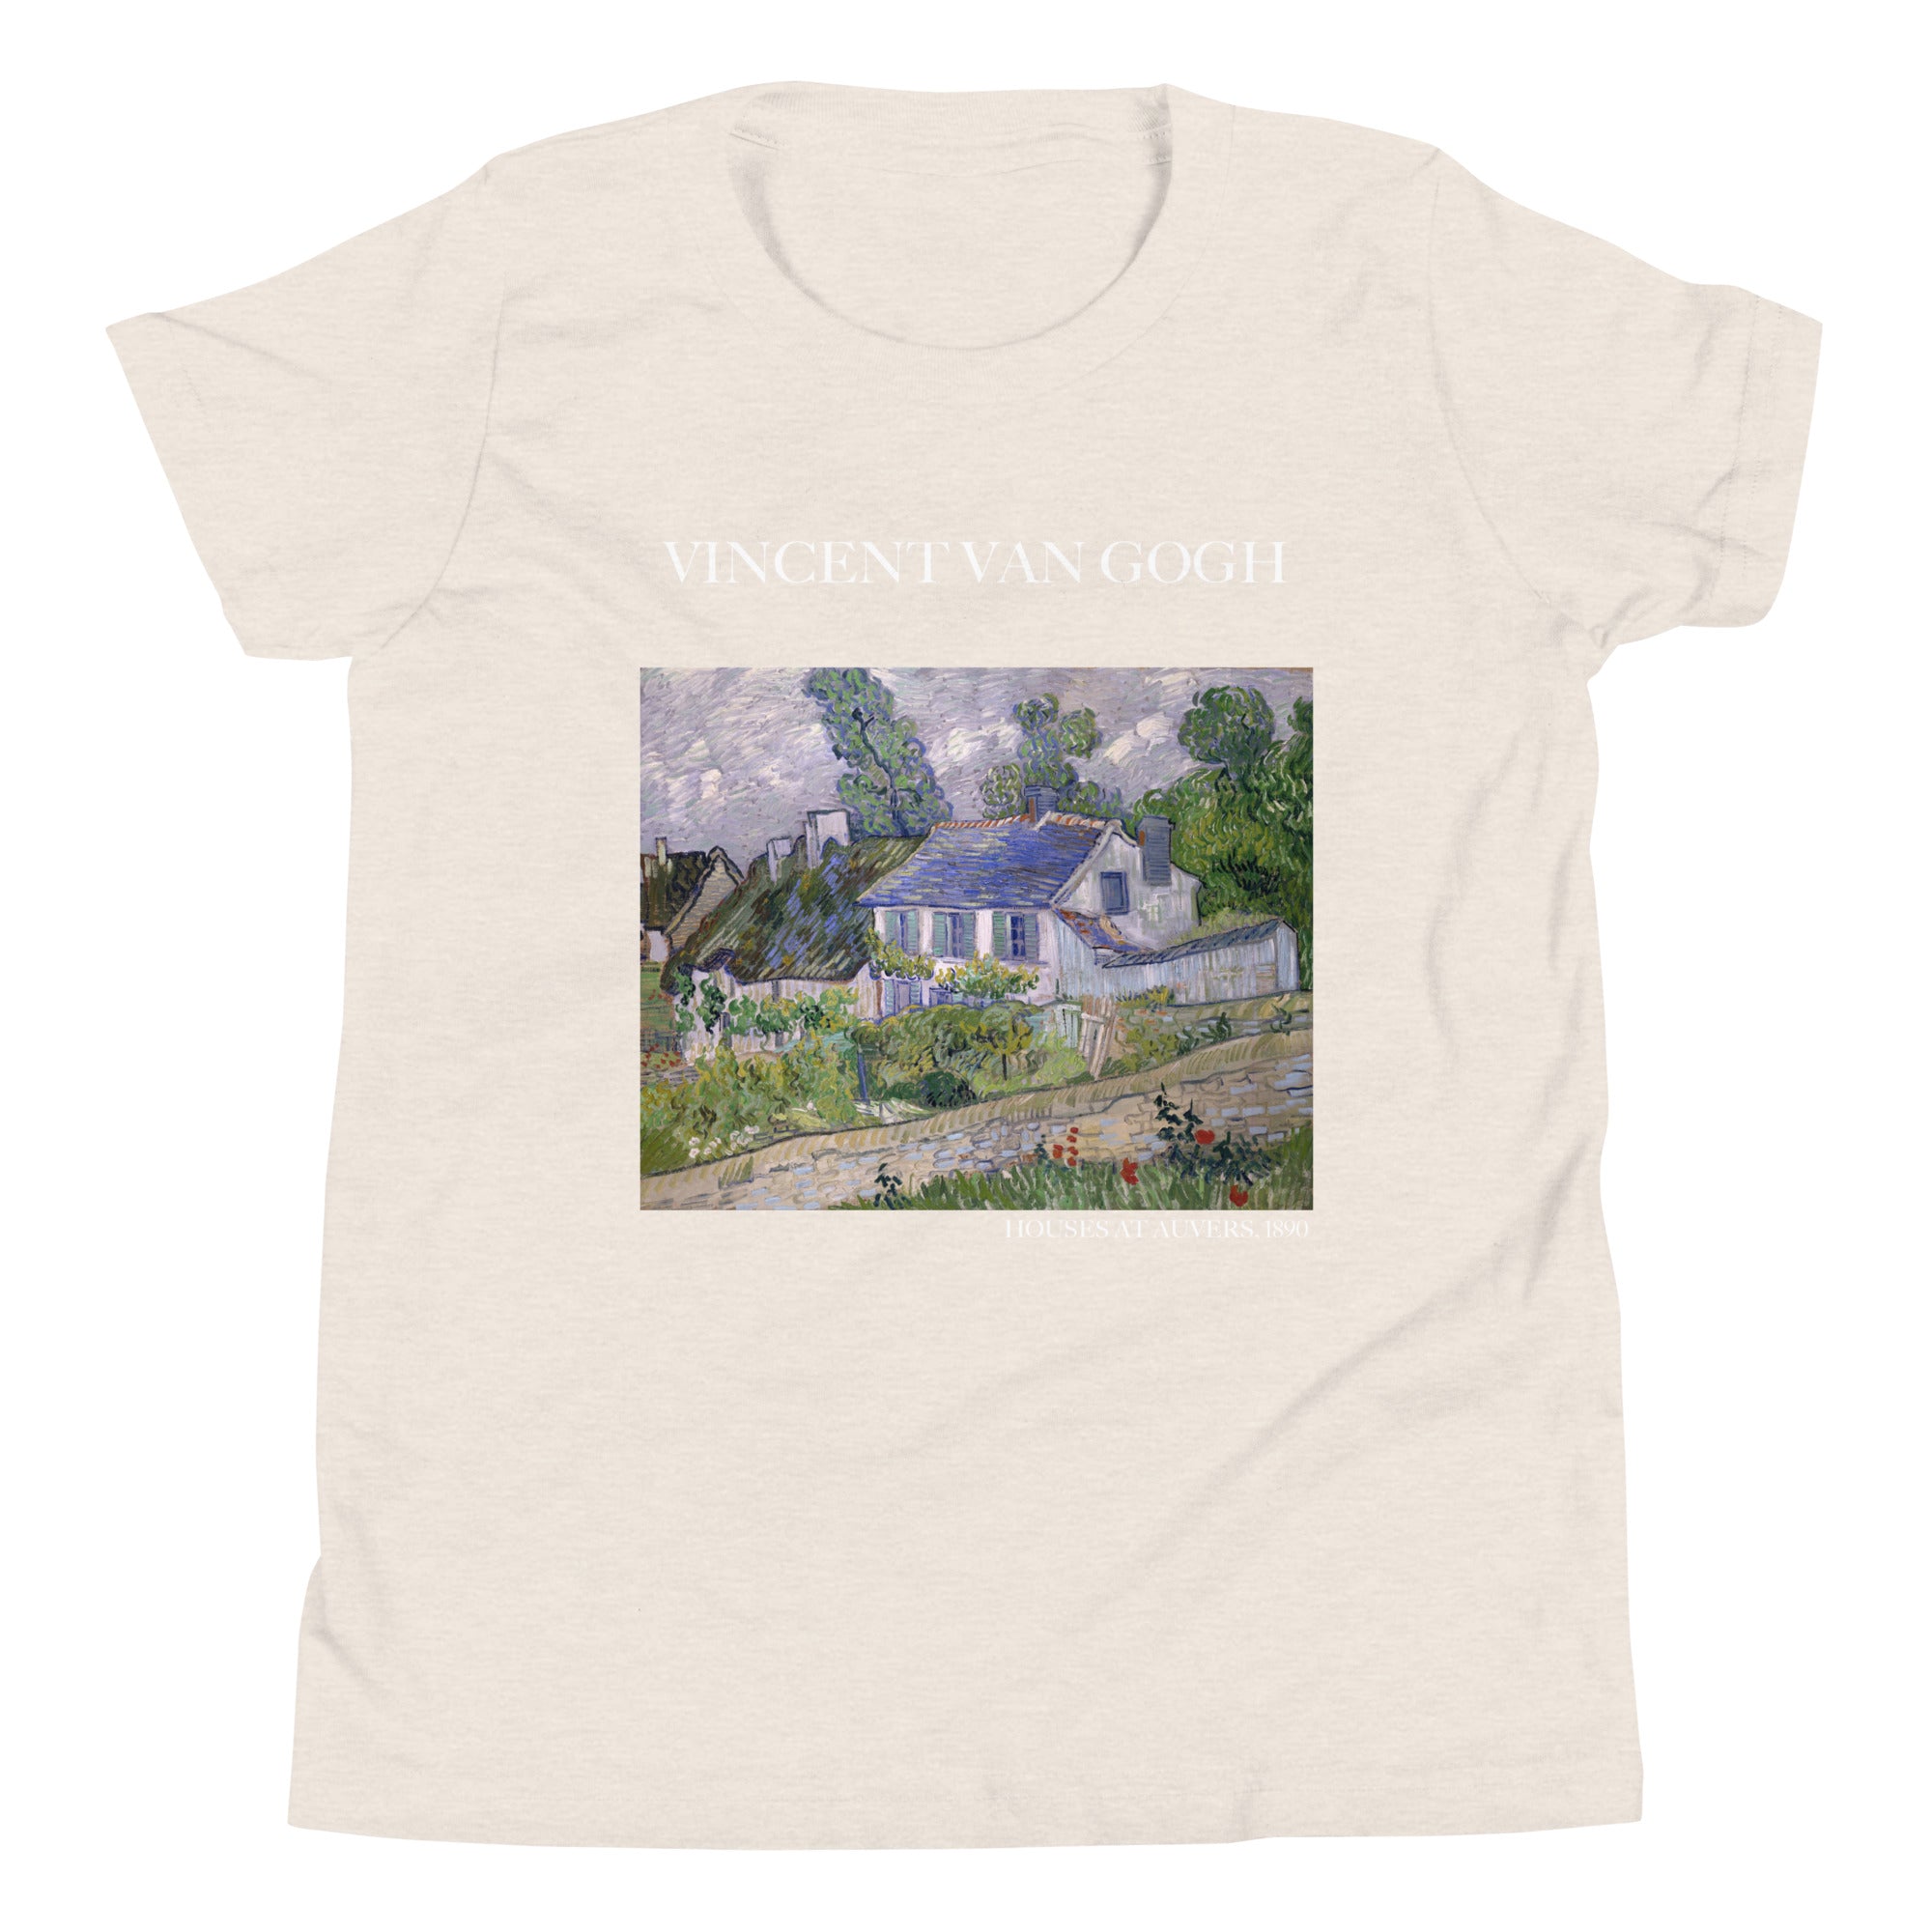 Vincent van Gogh 'Houses at Auvers' Famous Painting Short Sleeve T-Shirt | Premium Youth Art Tee